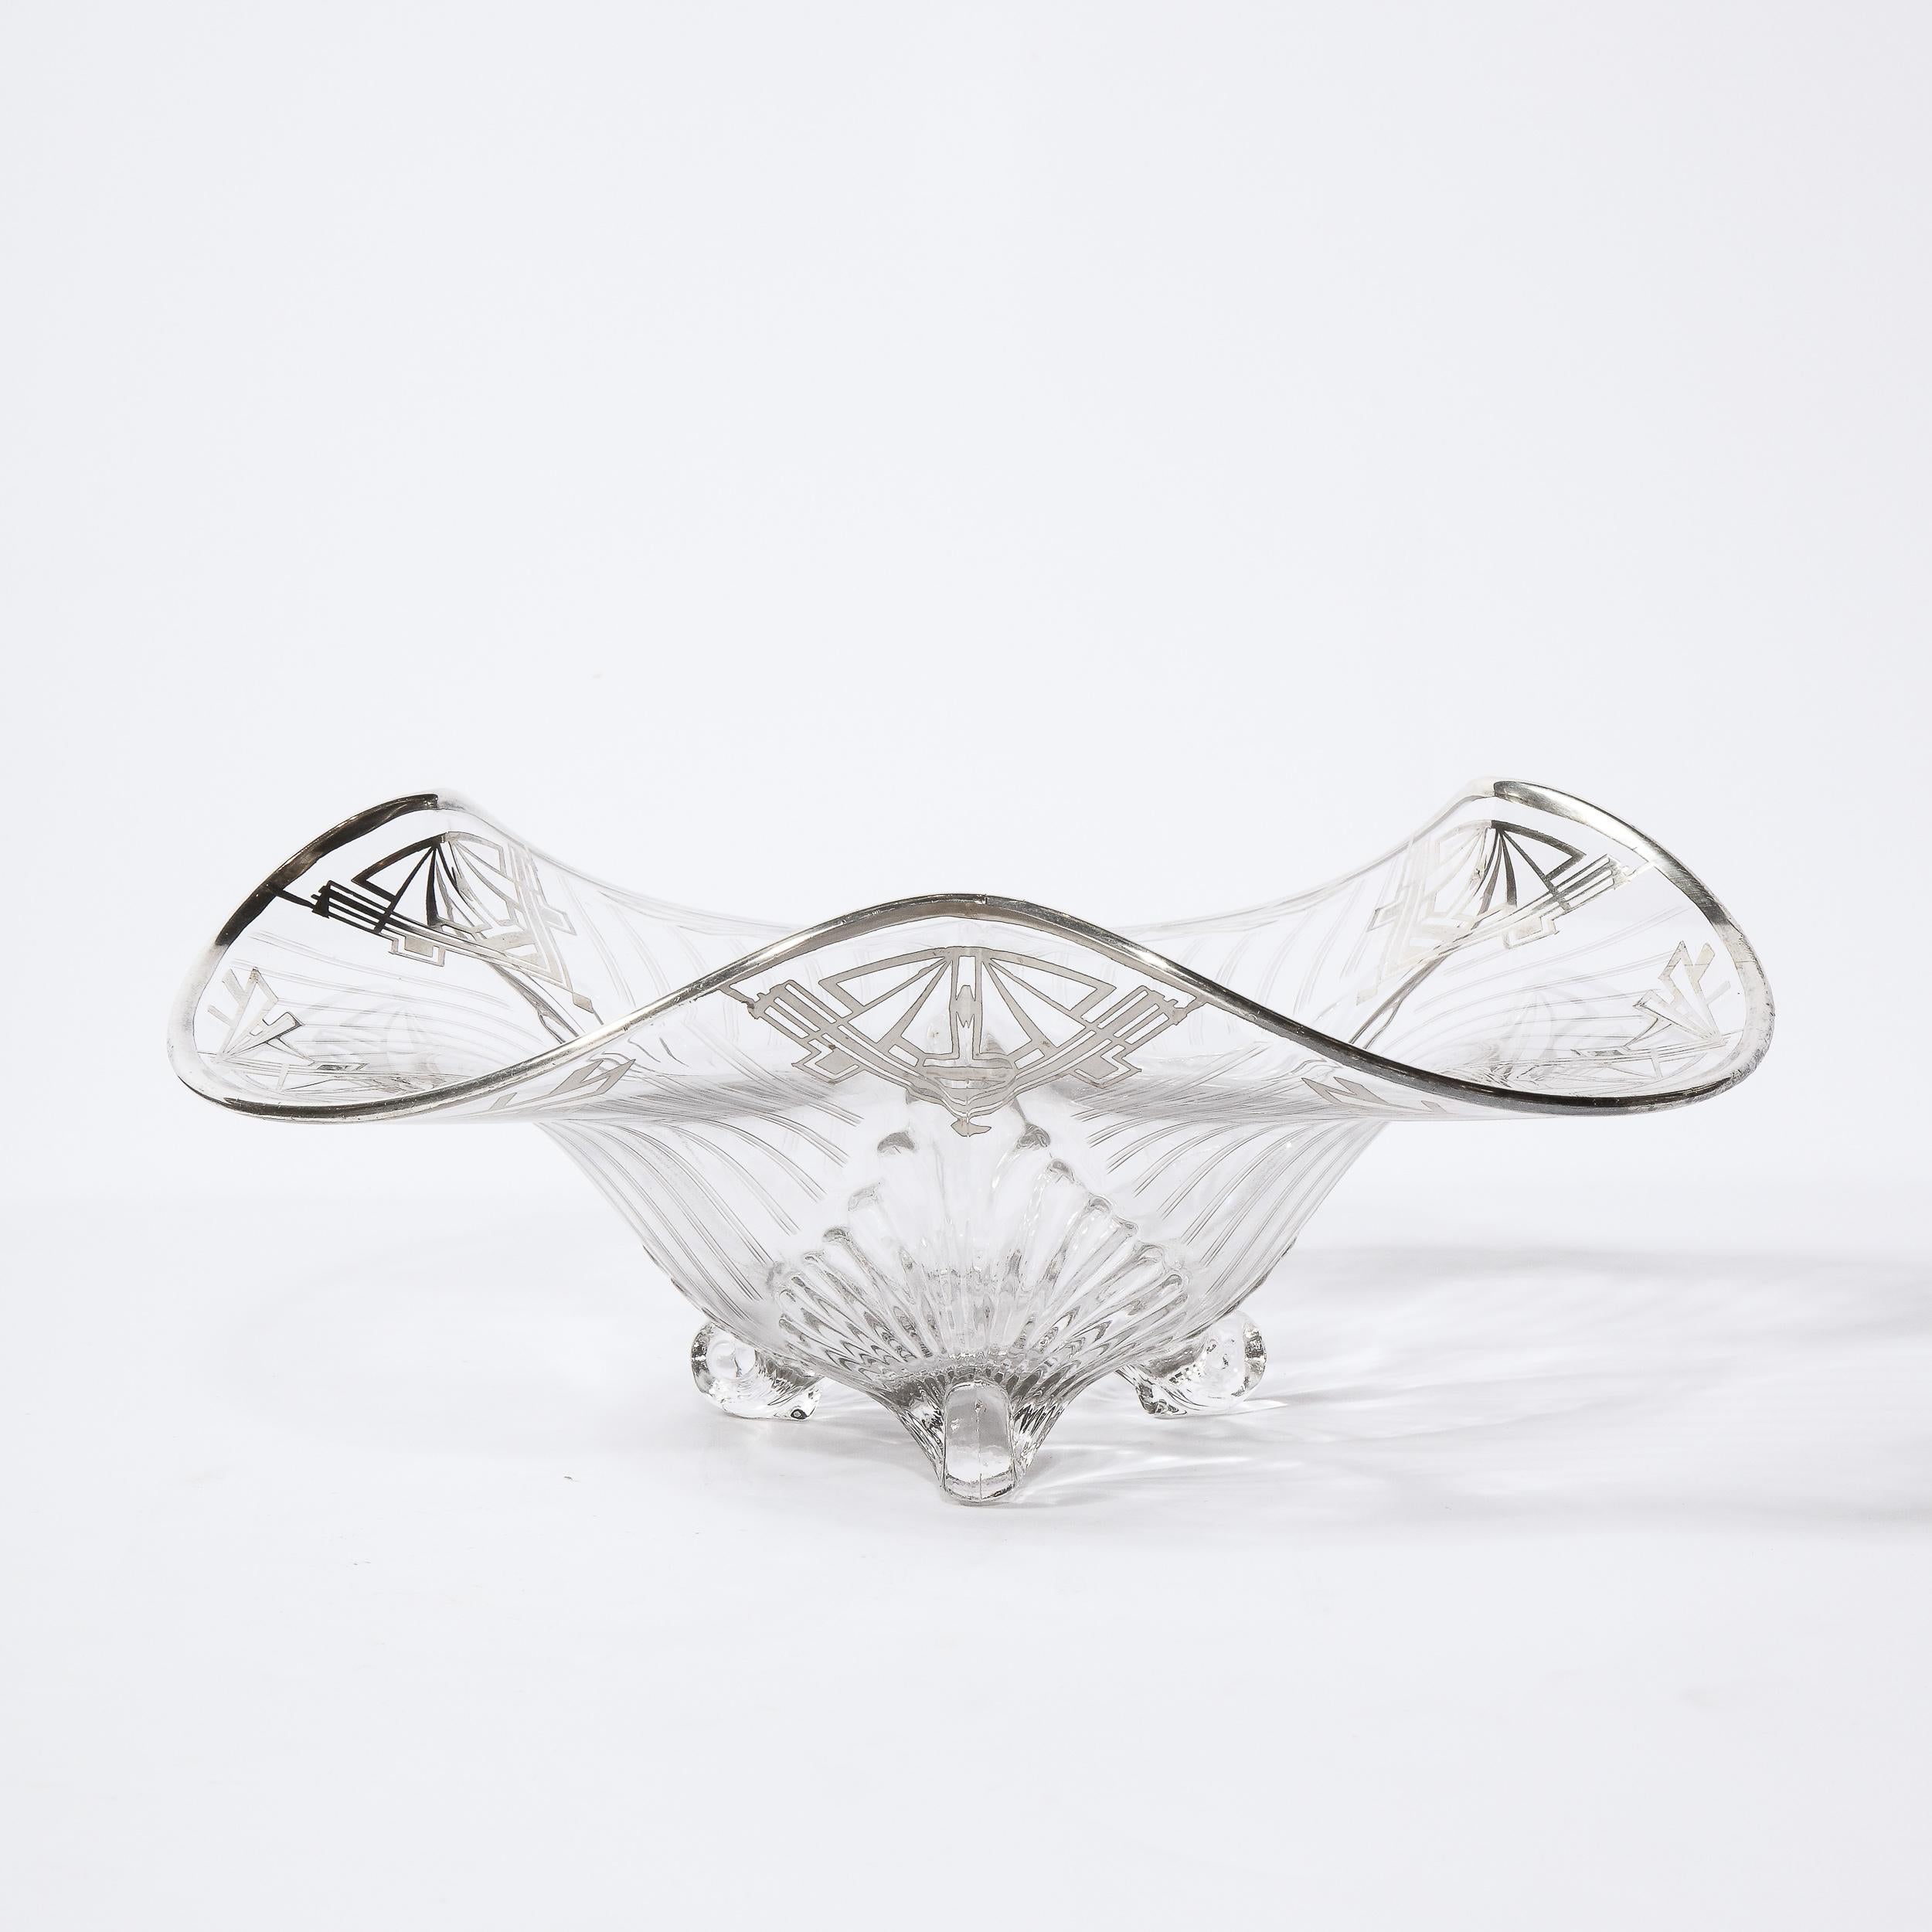 This stunning Art Deco Machine Age center bowl was realized in the United States circa 1935. It features sculptural translucent scroll form feet; an undulating curved top rimmed in sterling silver and stylized geometric detailing featuring diamond